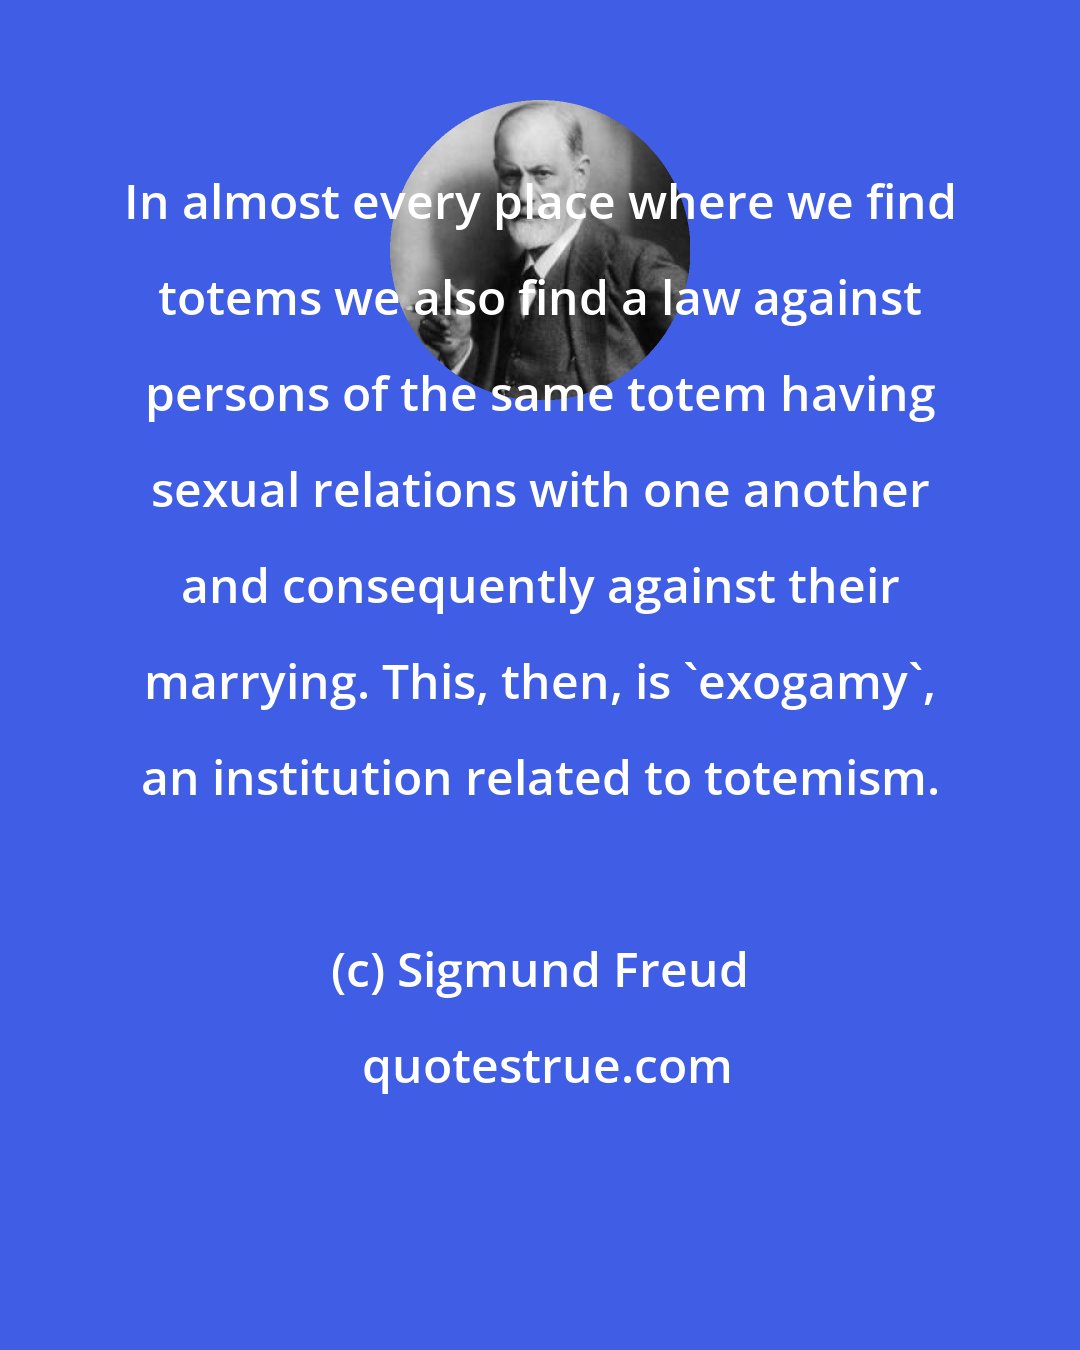 Sigmund Freud: In almost every place where we find totems we also find a law against persons of the same totem having sexual relations with one another and consequently against their marrying. This, then, is 'exogamy', an institution related to totemism.